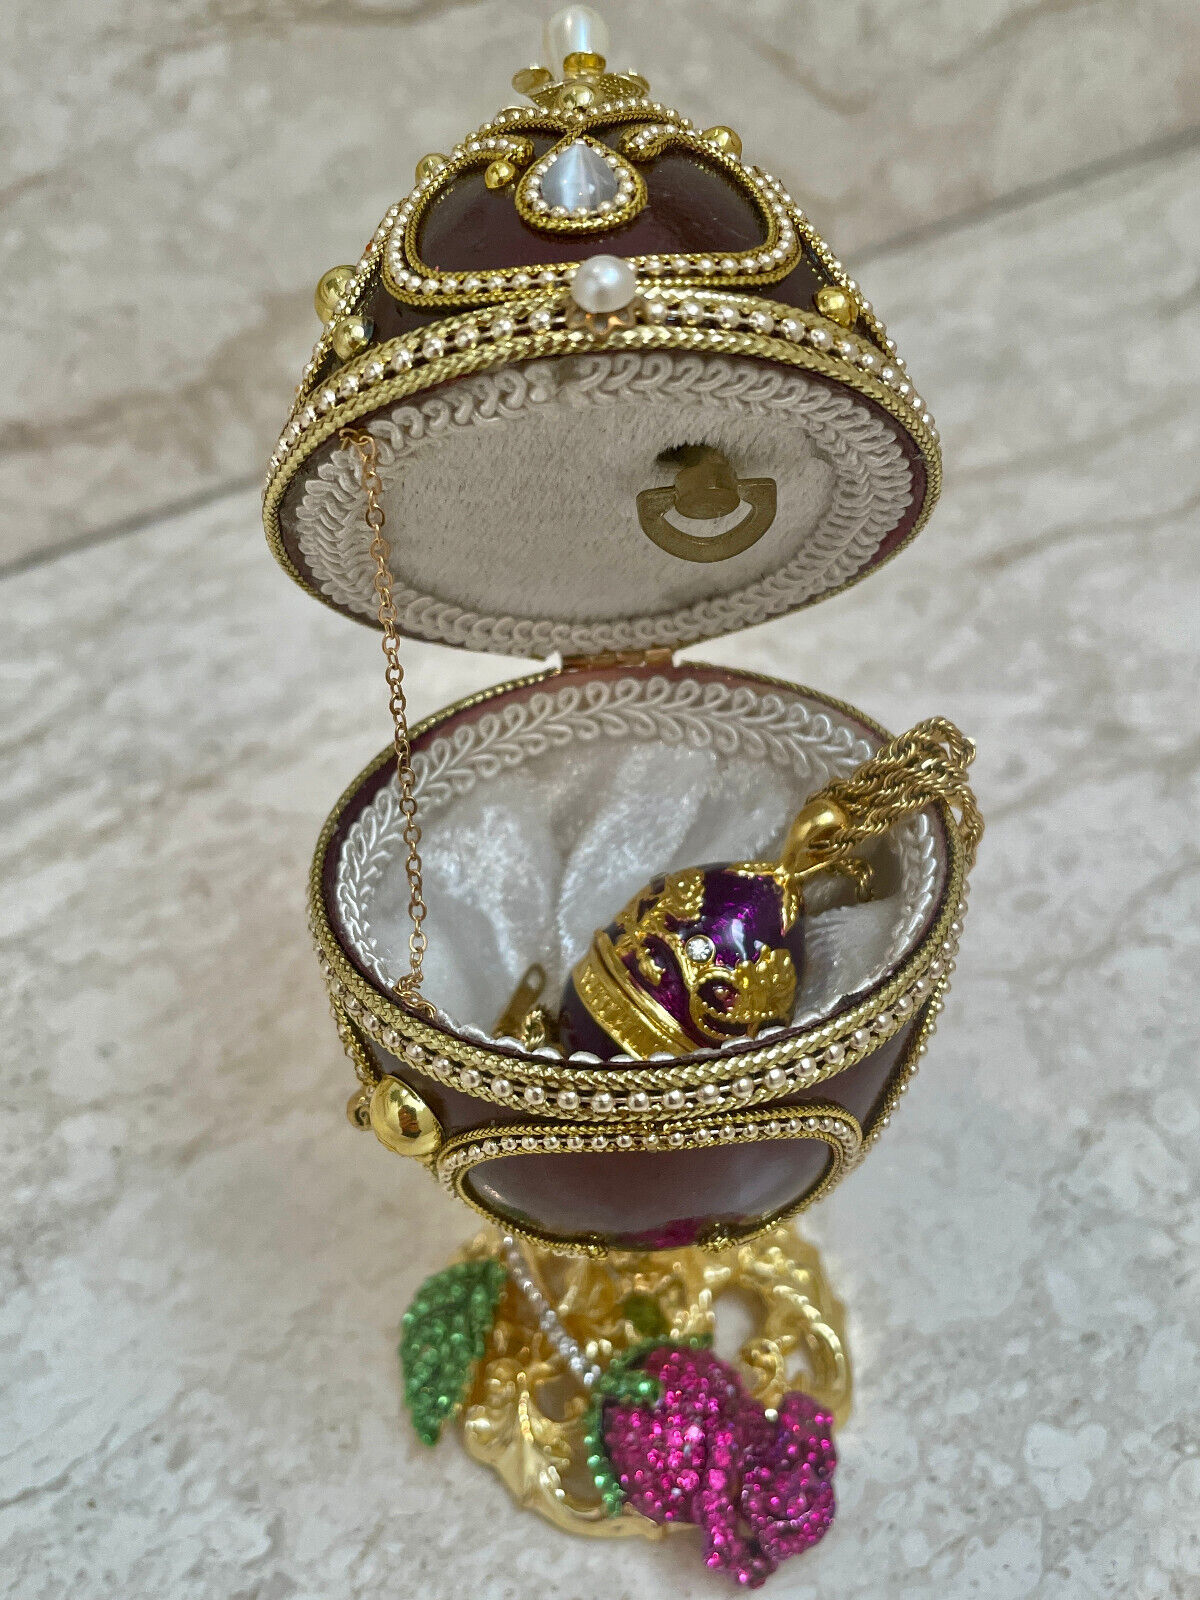 Valentine's day gift  for wife Fabergé Egg Gold DeCor Amethyst Diamond Faberge